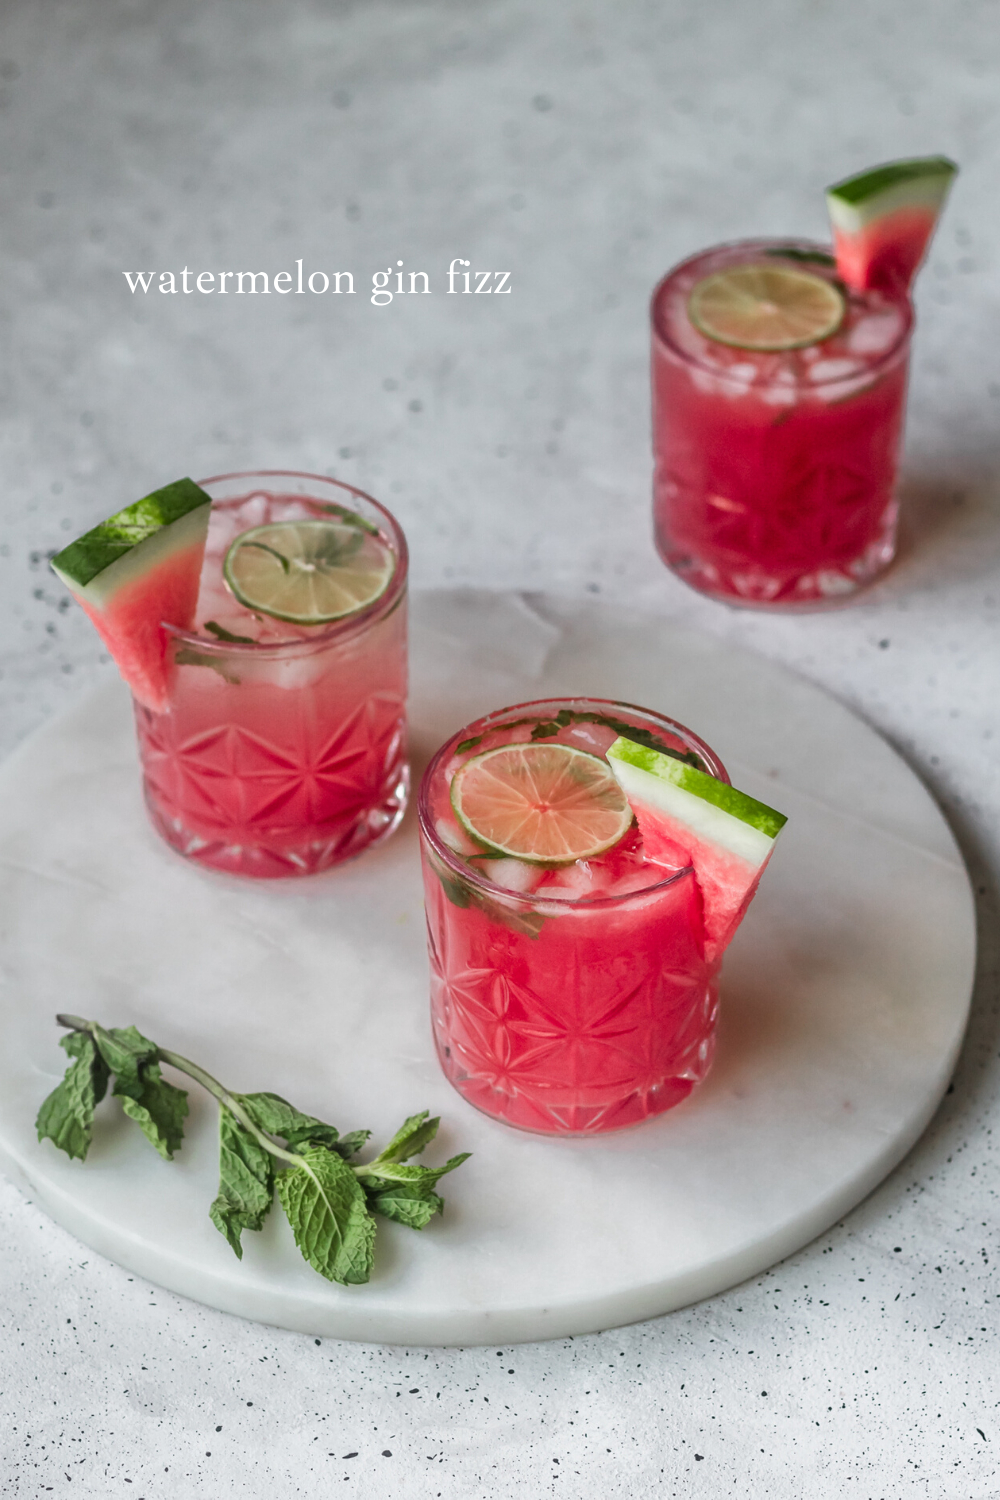 A watermelon gin fizz perfect for summertime sipping!